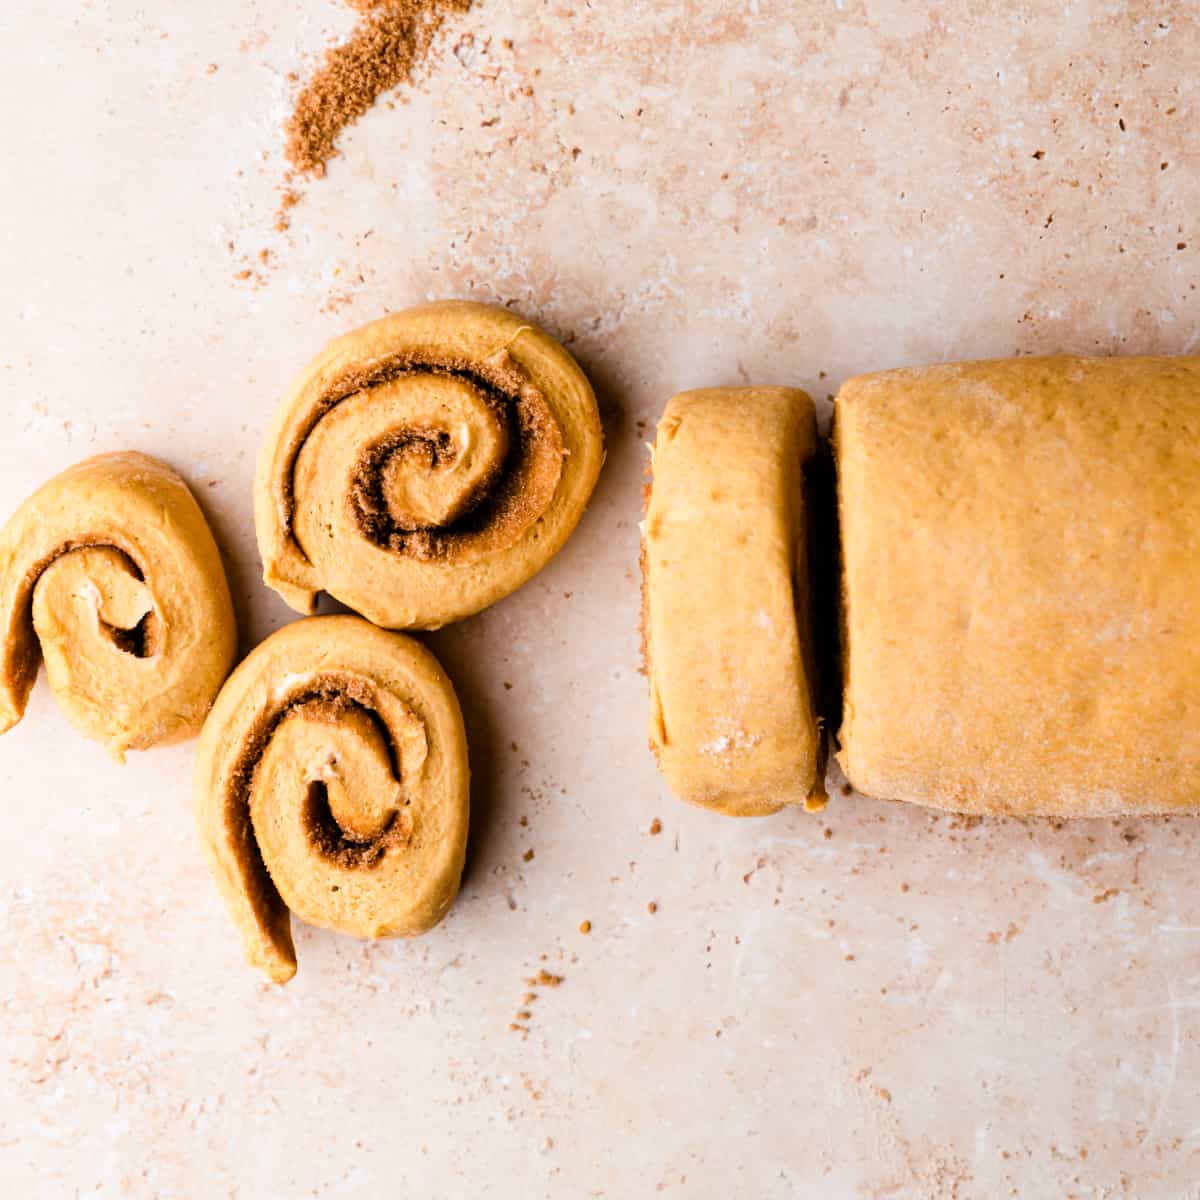 rolled dough cut into slices.